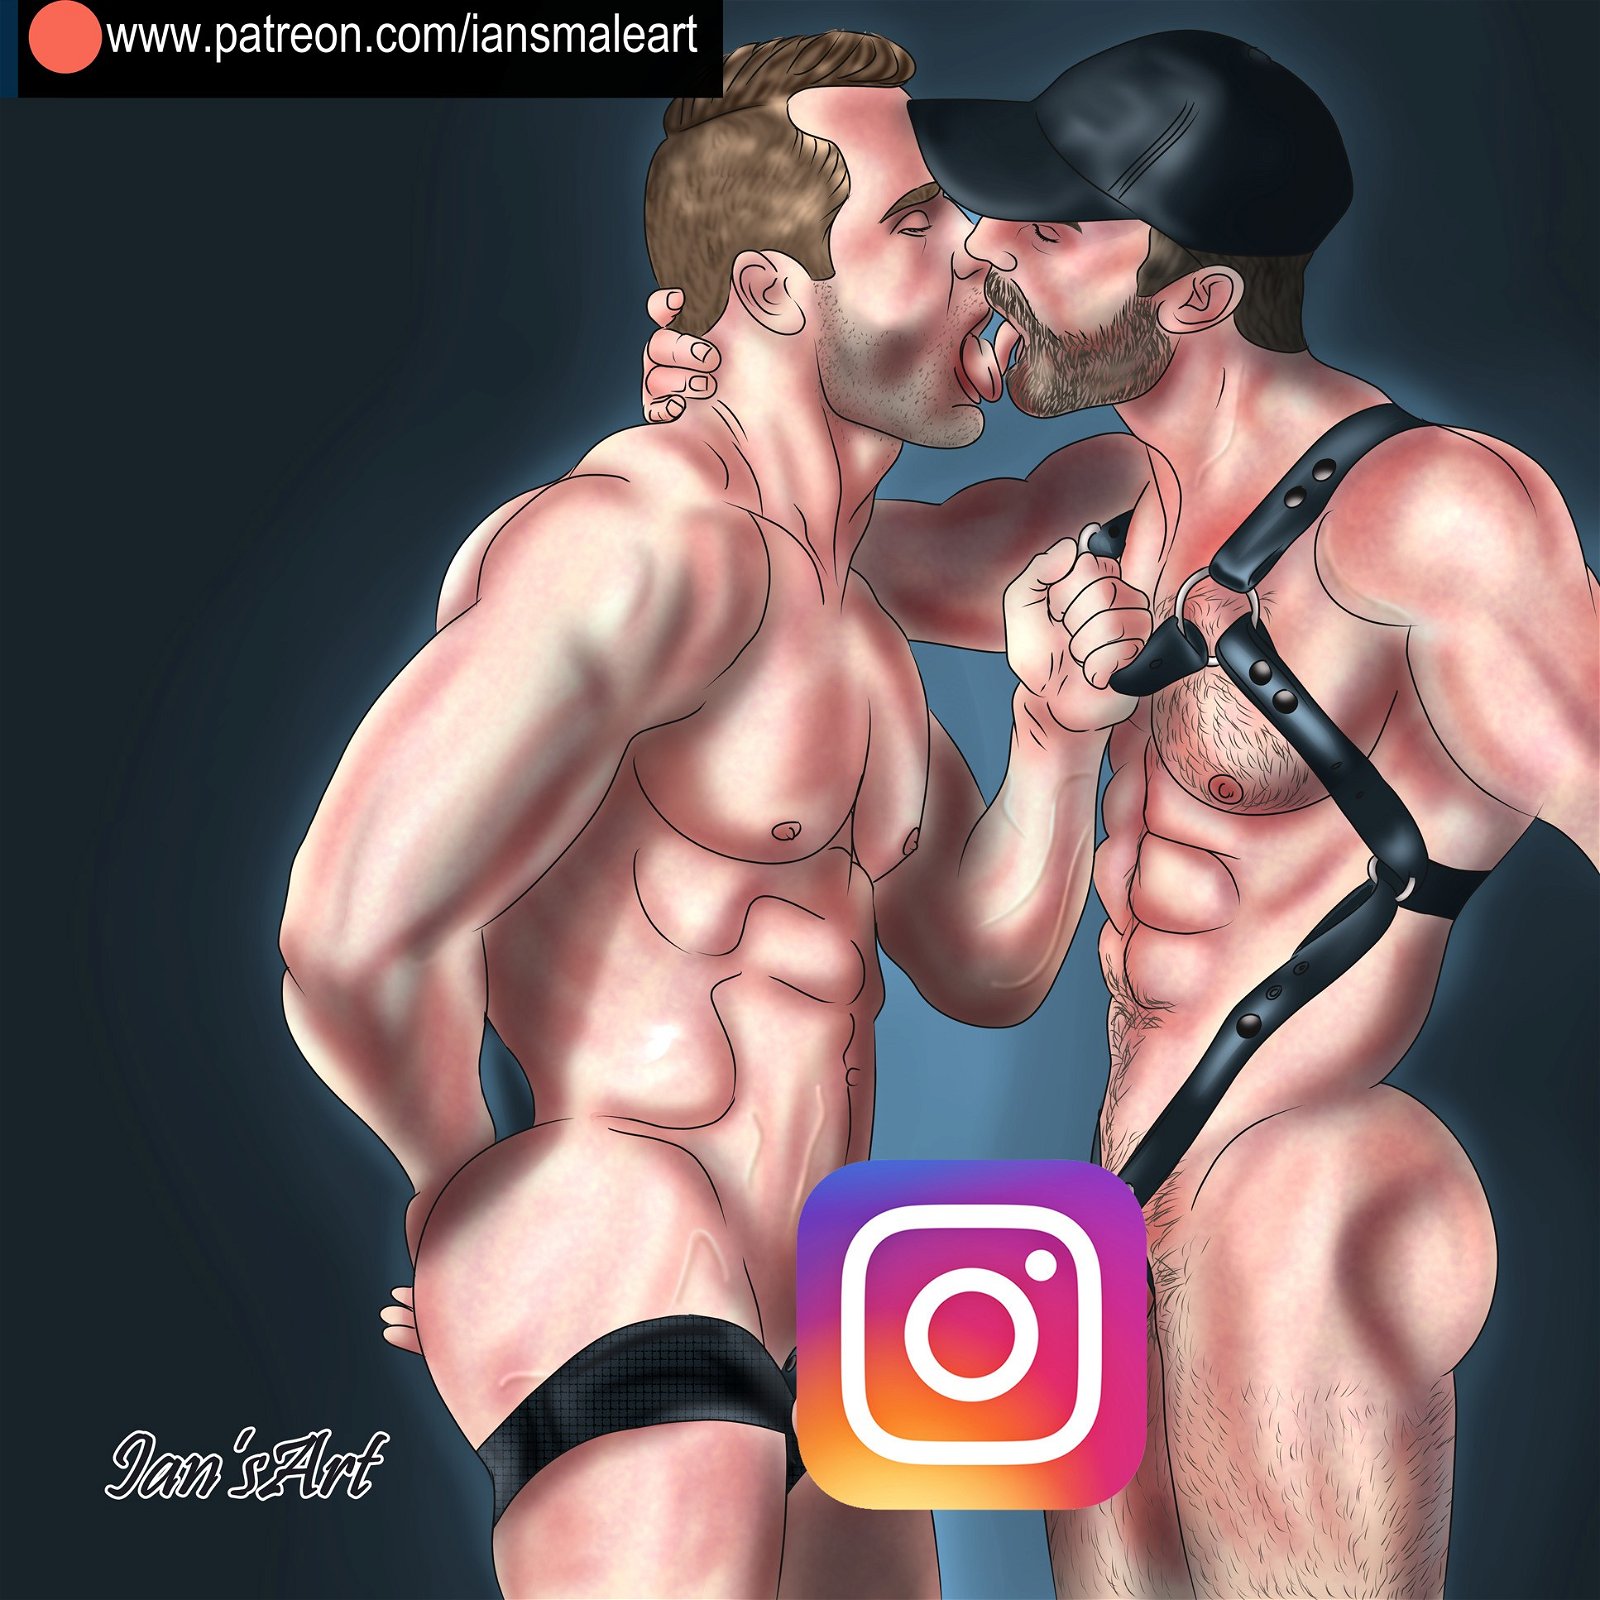 Watch the Photo by Iansmaleart with the username @iansmaleart1, posted on October 30, 2019. The post is about the topic Gay. and the text says 'Leather couple 😜'